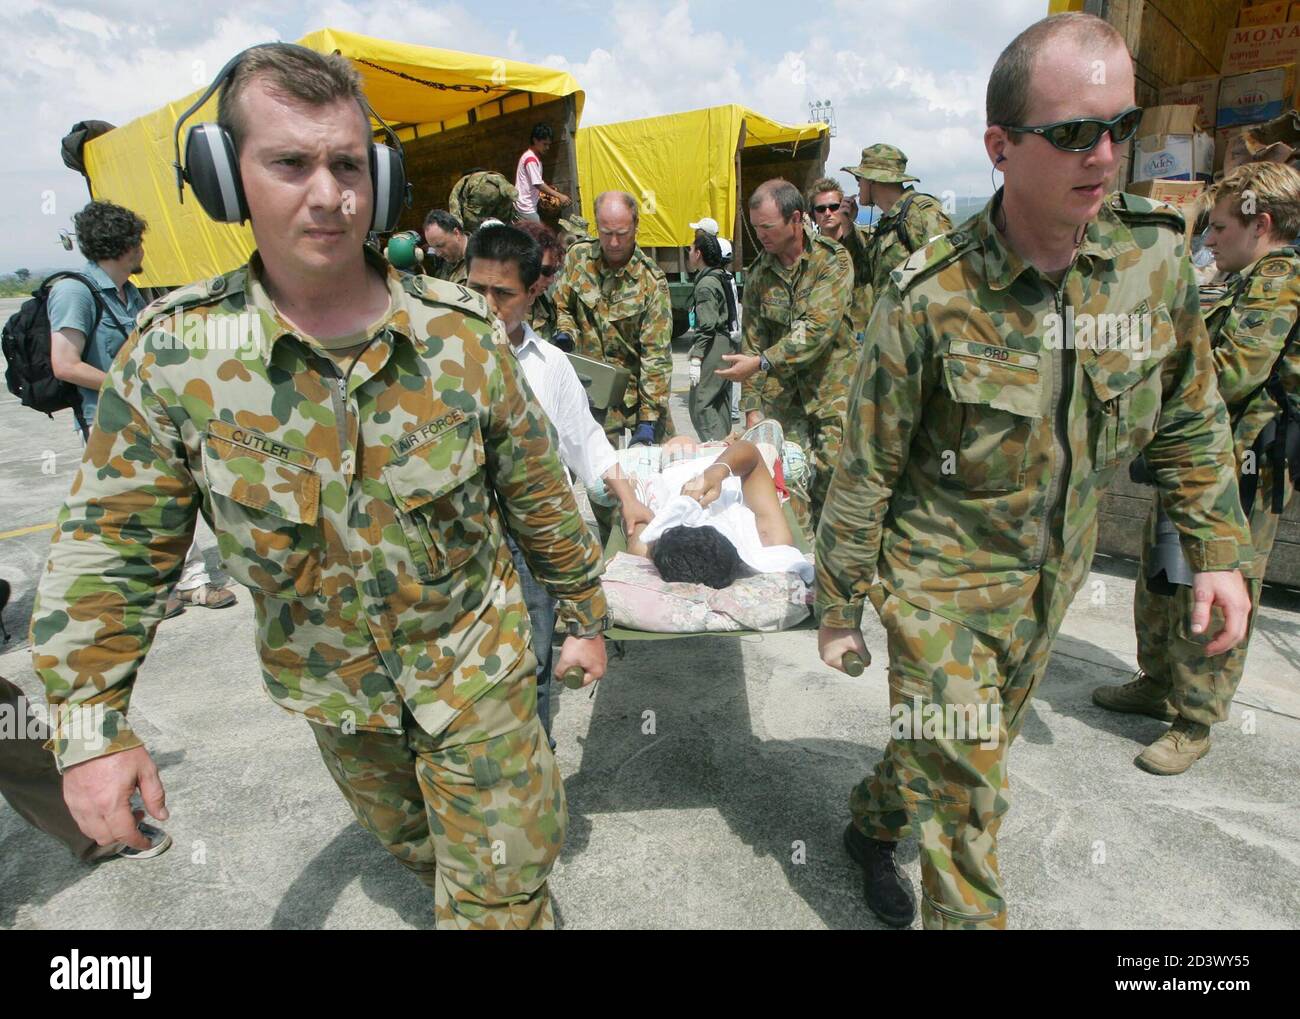 Australian soldiers at Banda Aceh airport carry an injured Acehnese January 4, 2005. Aid workers cleared landing strips in Asia's flooded tsunami-hit regions to start flying food, clean water and doctors to hungry and injured survivors, but the global relief operation continued to struggle on Tuesday. REUTERS/Kim Kyung-Hoon  KKH Stock Photo